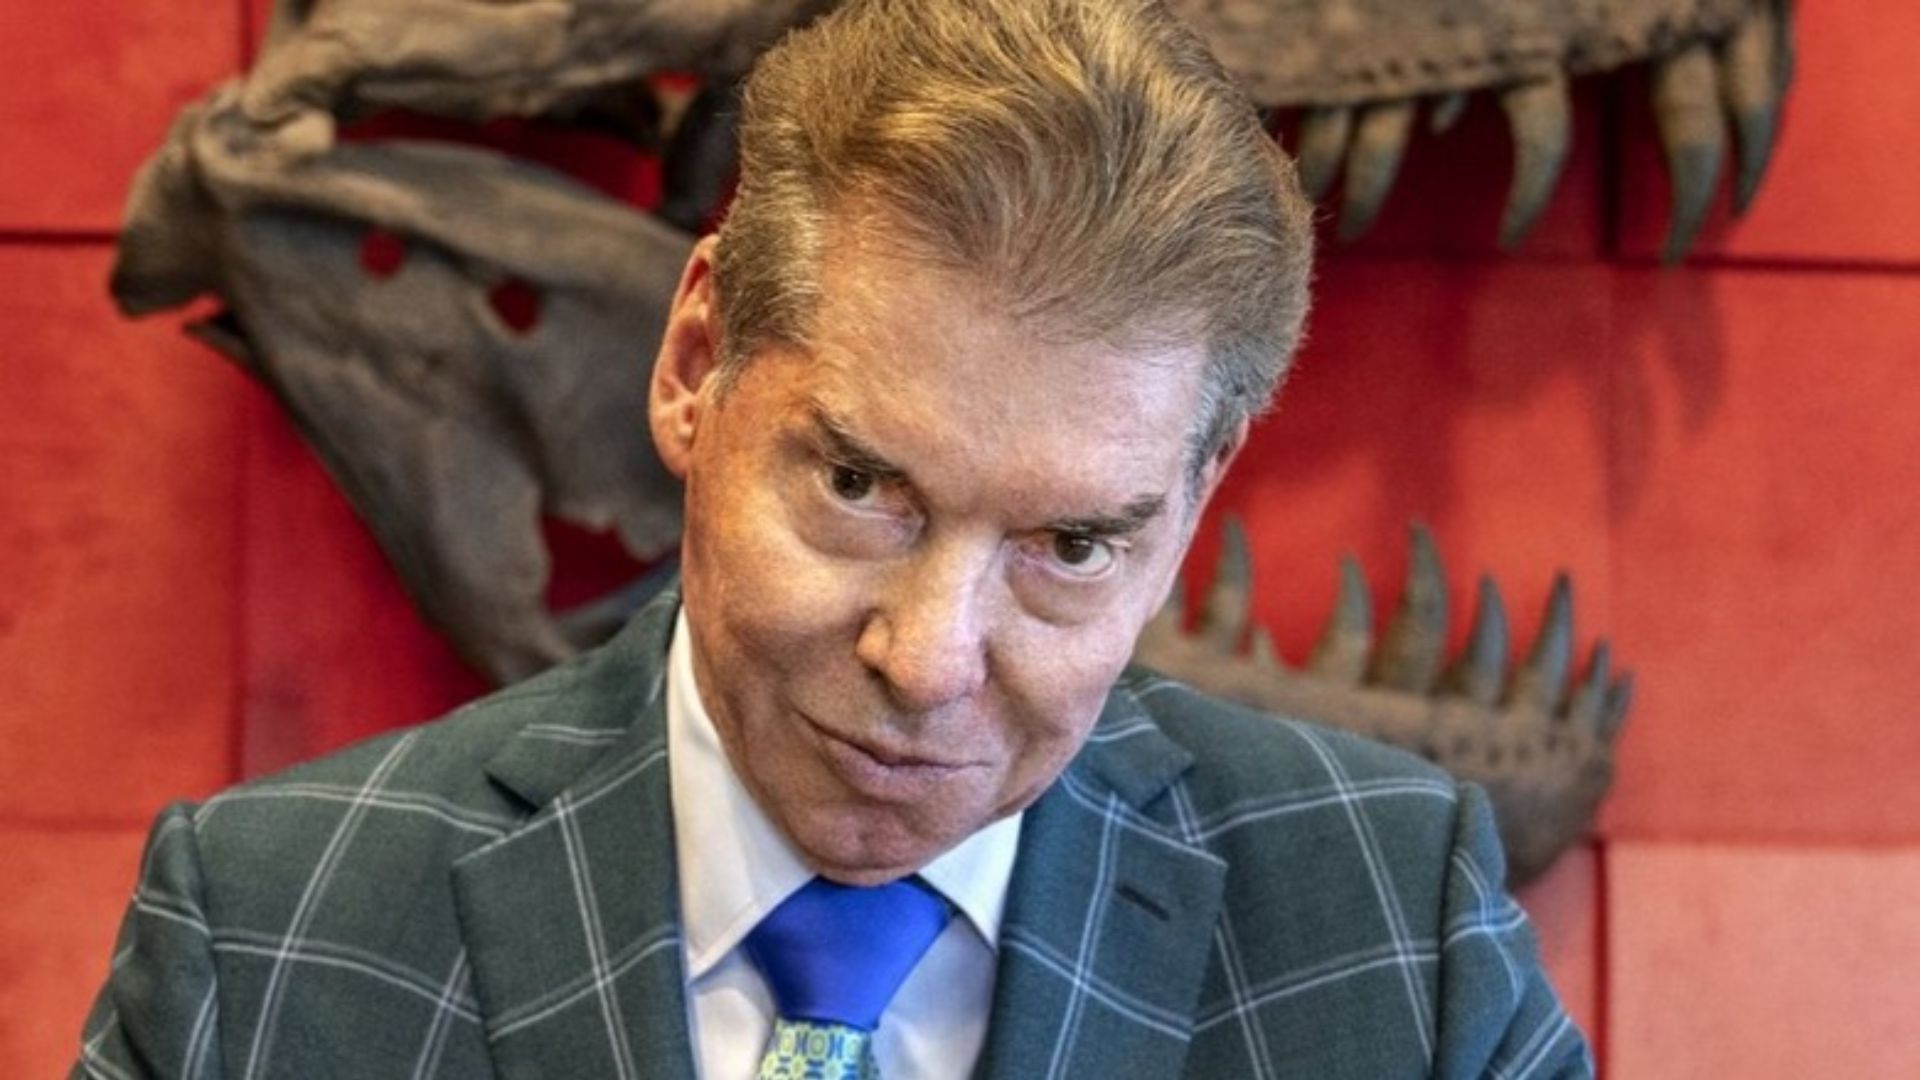 Vince McMahon is a co-founder of WWE